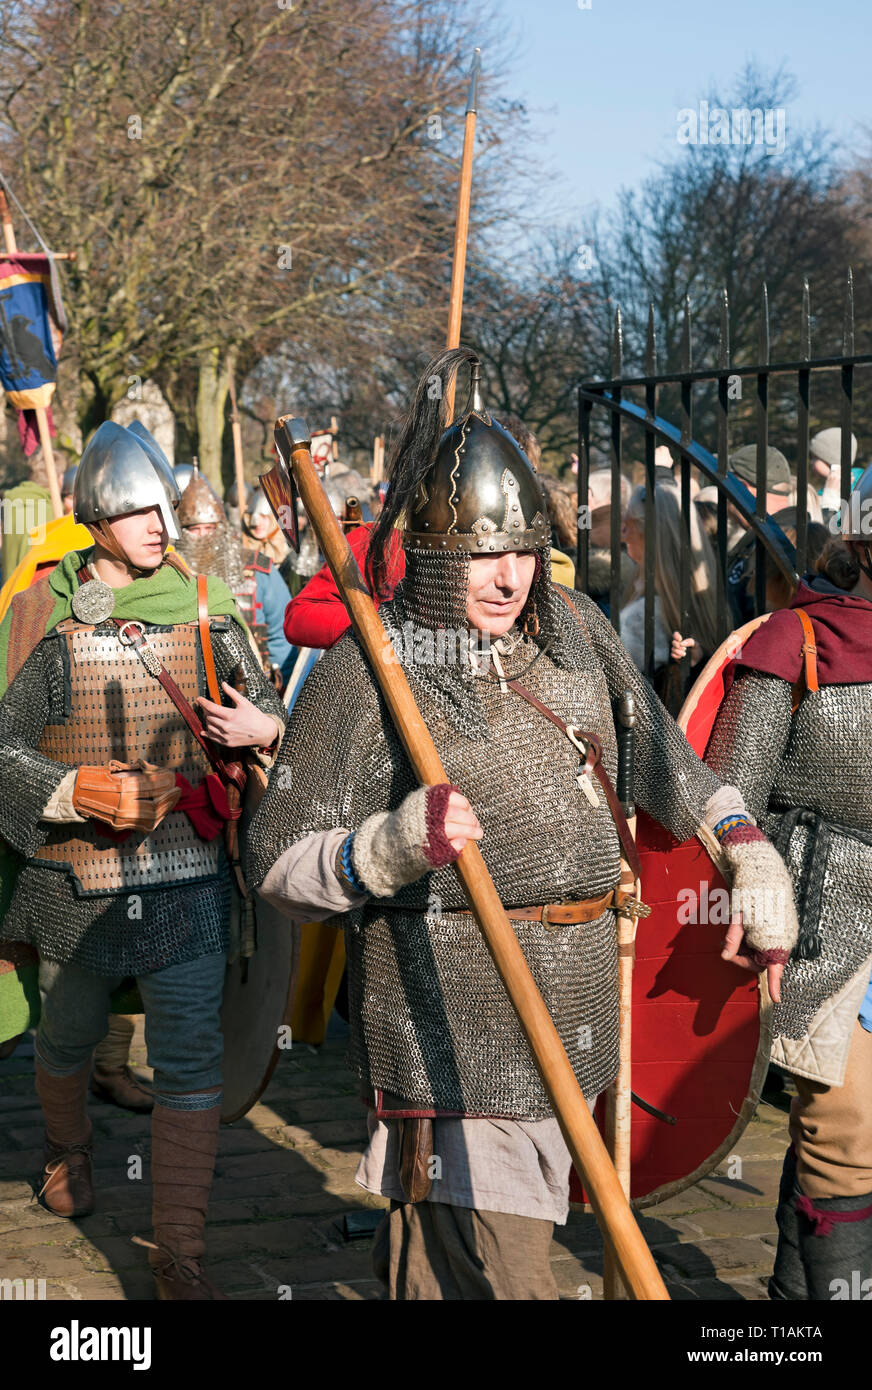 Procession of people in costume at the Viking Festival York North Yorkshire England UK United Kingdom GB Great Britain Stock Photo